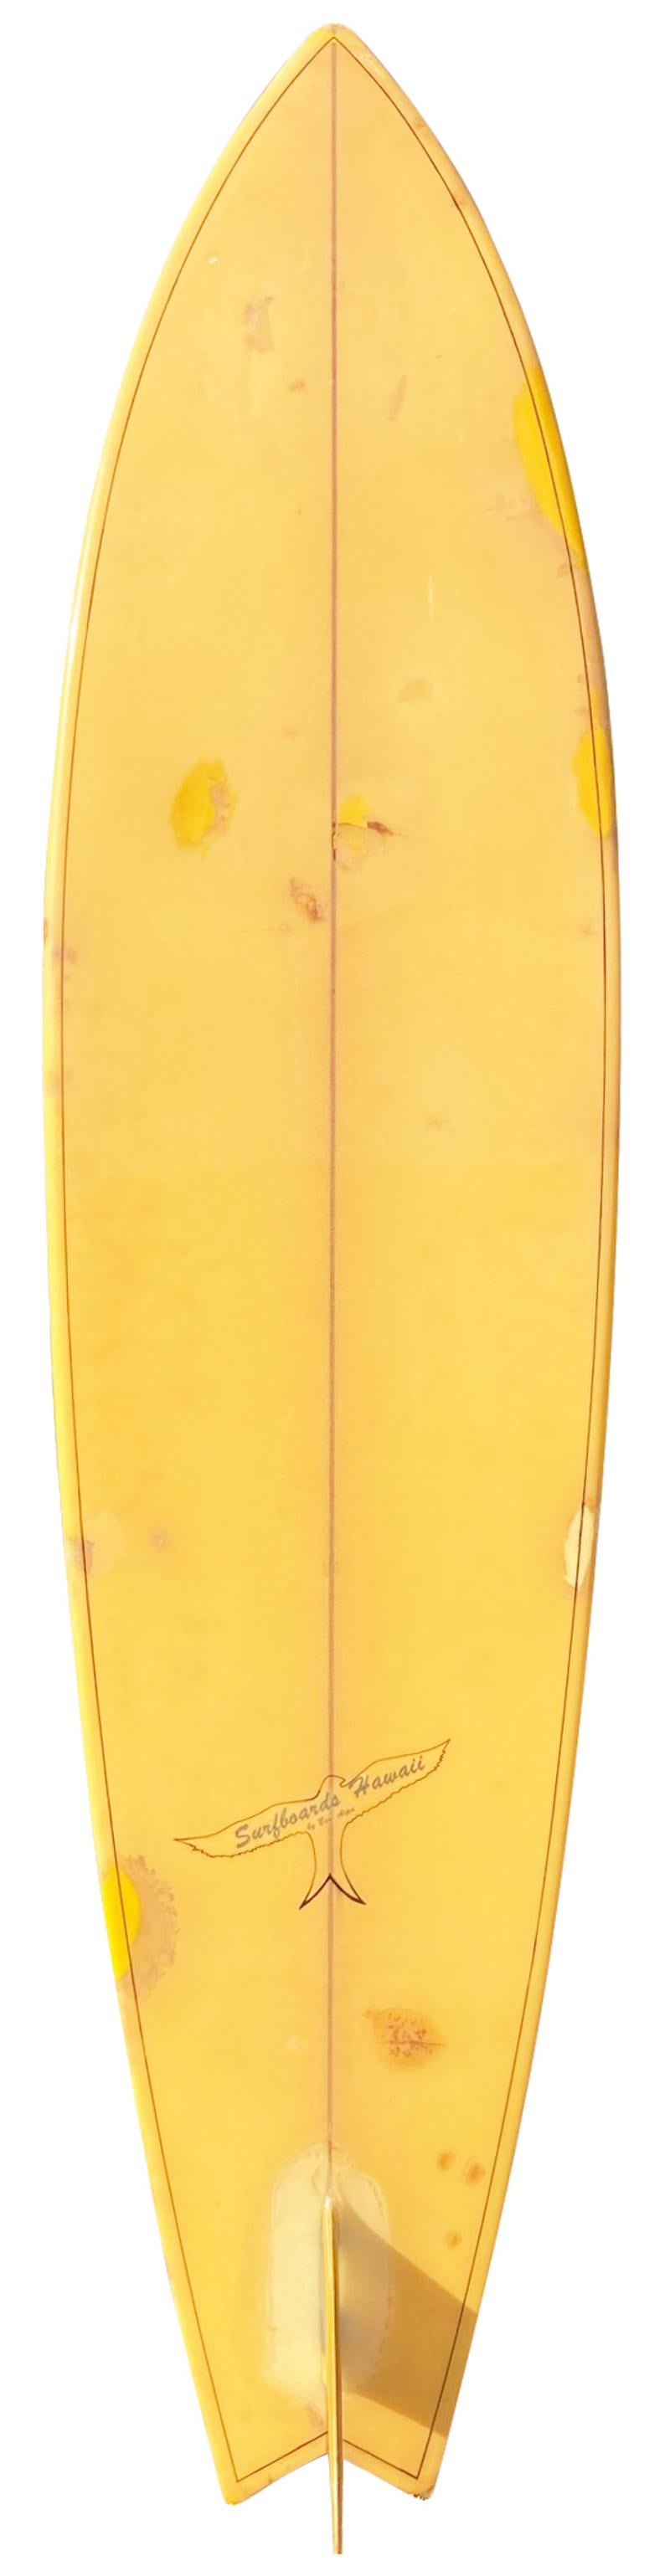 Early 1970s Surfboards Hawaii single fin shaped by Ben Aipa. Features a double pin line design, tri-color single fin, and the original Surfboards Hawaii swallow-tailed bird logo. This was the very first logo Aipa used when shaping for Surfboards